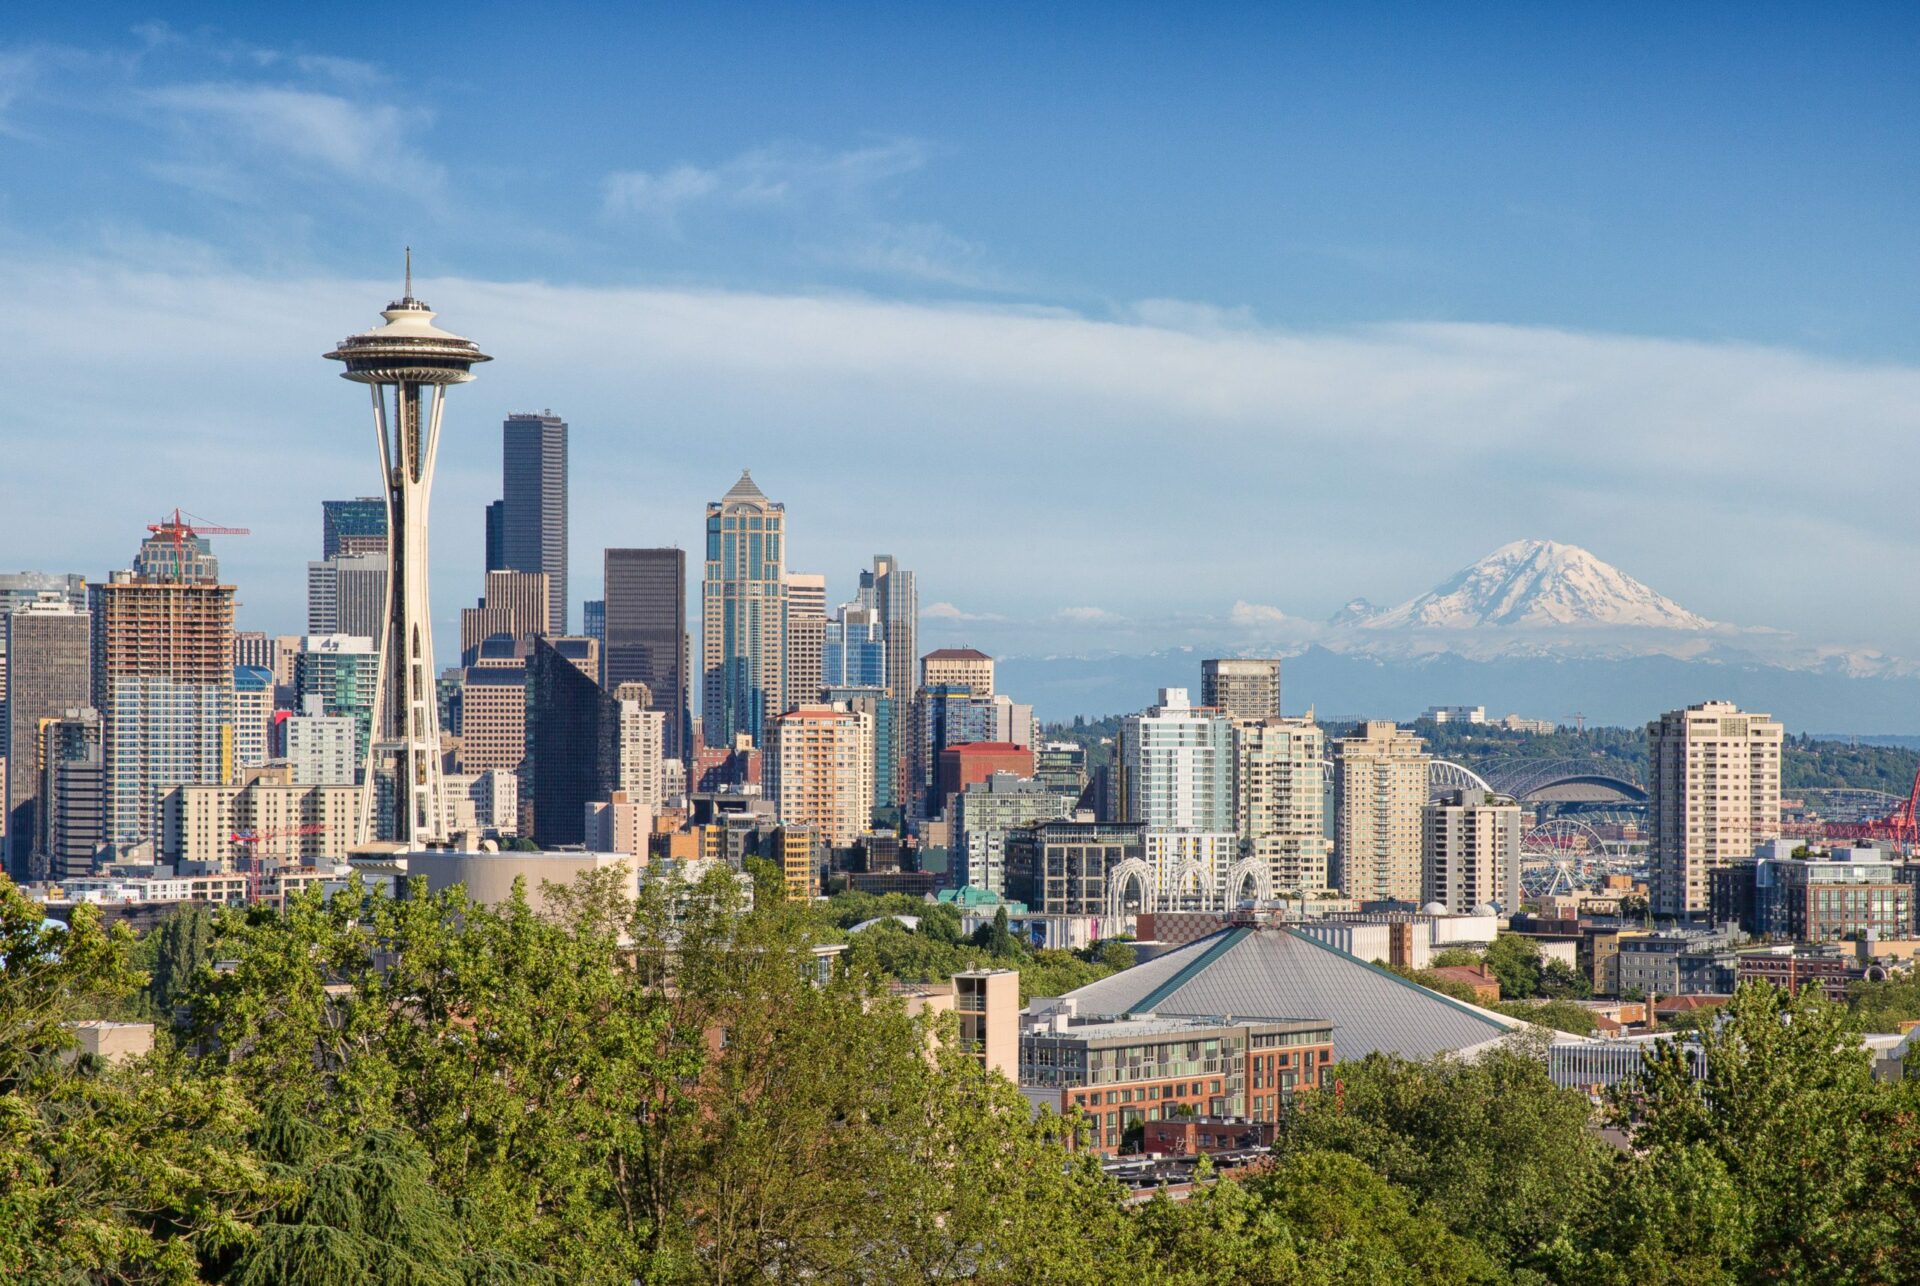 Built in Seattle: These Well-Funded Seattle Companies Are Ready To Make an Impact